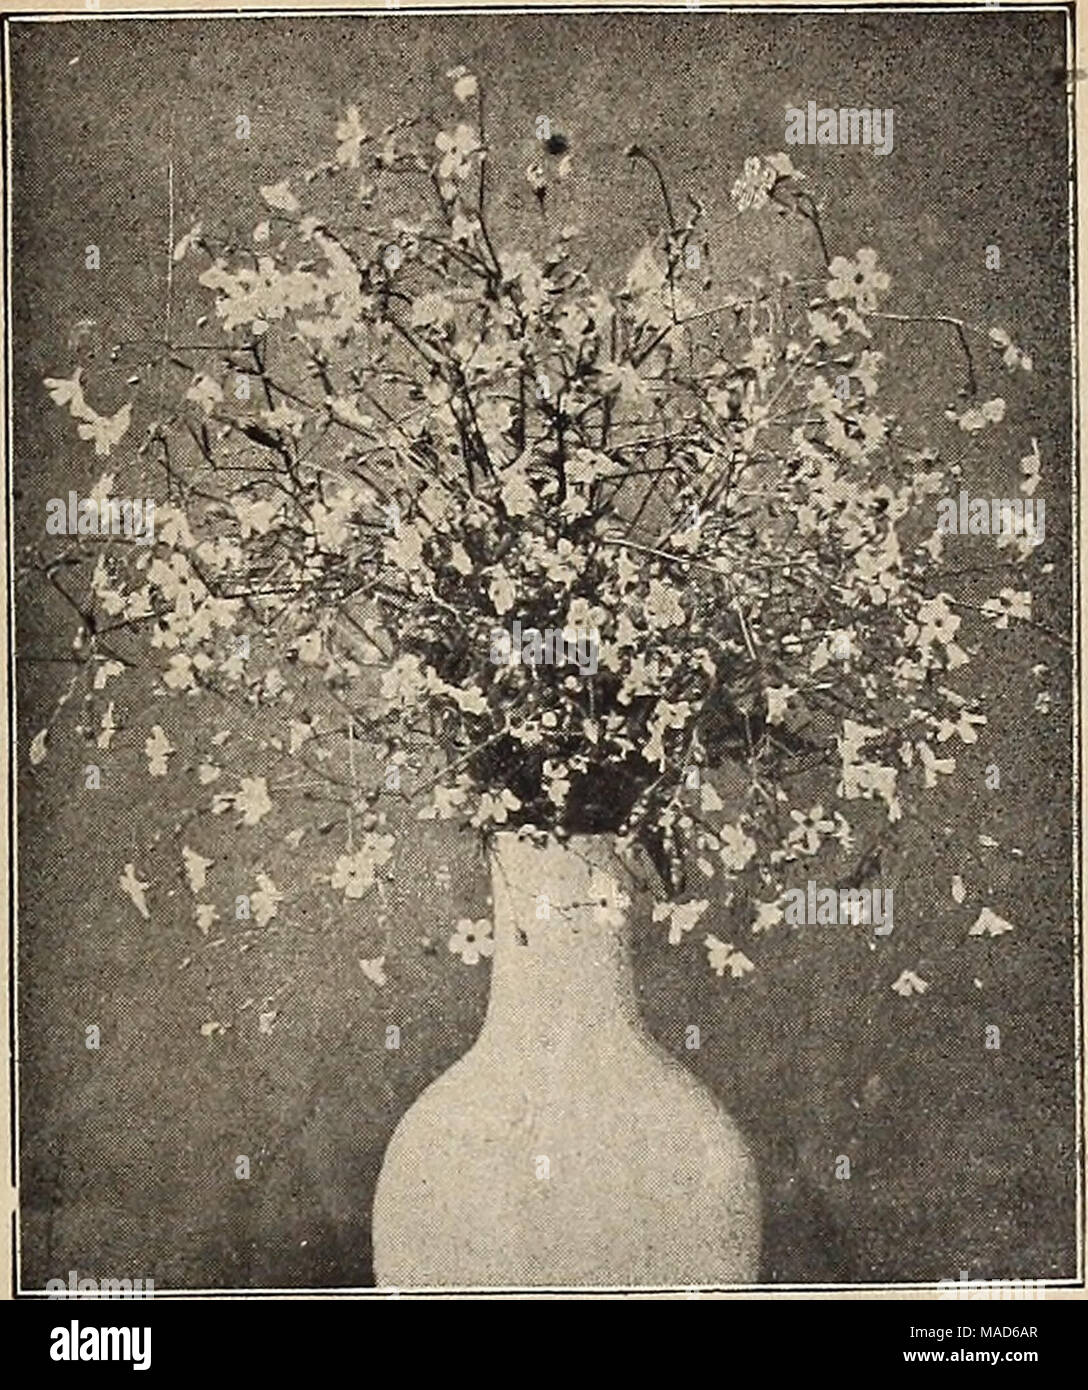 . Dreer's special mid-summer offer for florists 1920 : reliable flower seeds flor florists bulbs for florists . GYPSOPHILA ELEGANS ALBA GRAND1FLORA Gloxinia. Our supply of these are from world-renowned sources and can- not fail to give satisfactory results. Tr. pkt. Hybrlda Qrandlflora, choicest mixed; all kinds ... $1 00 Qrevillea (Silk Oak). Robusta. A highly ornamental foliage plant, useful in many ways, and easily and rapidly raised from seed Qypsophila Blegans, Alba Qrandlflora. A fine large flowering form of the annual Baby's Breath; fine for cutting. 40 cts. per »/i-lb.; $1.25 per lb Im Stock Photo